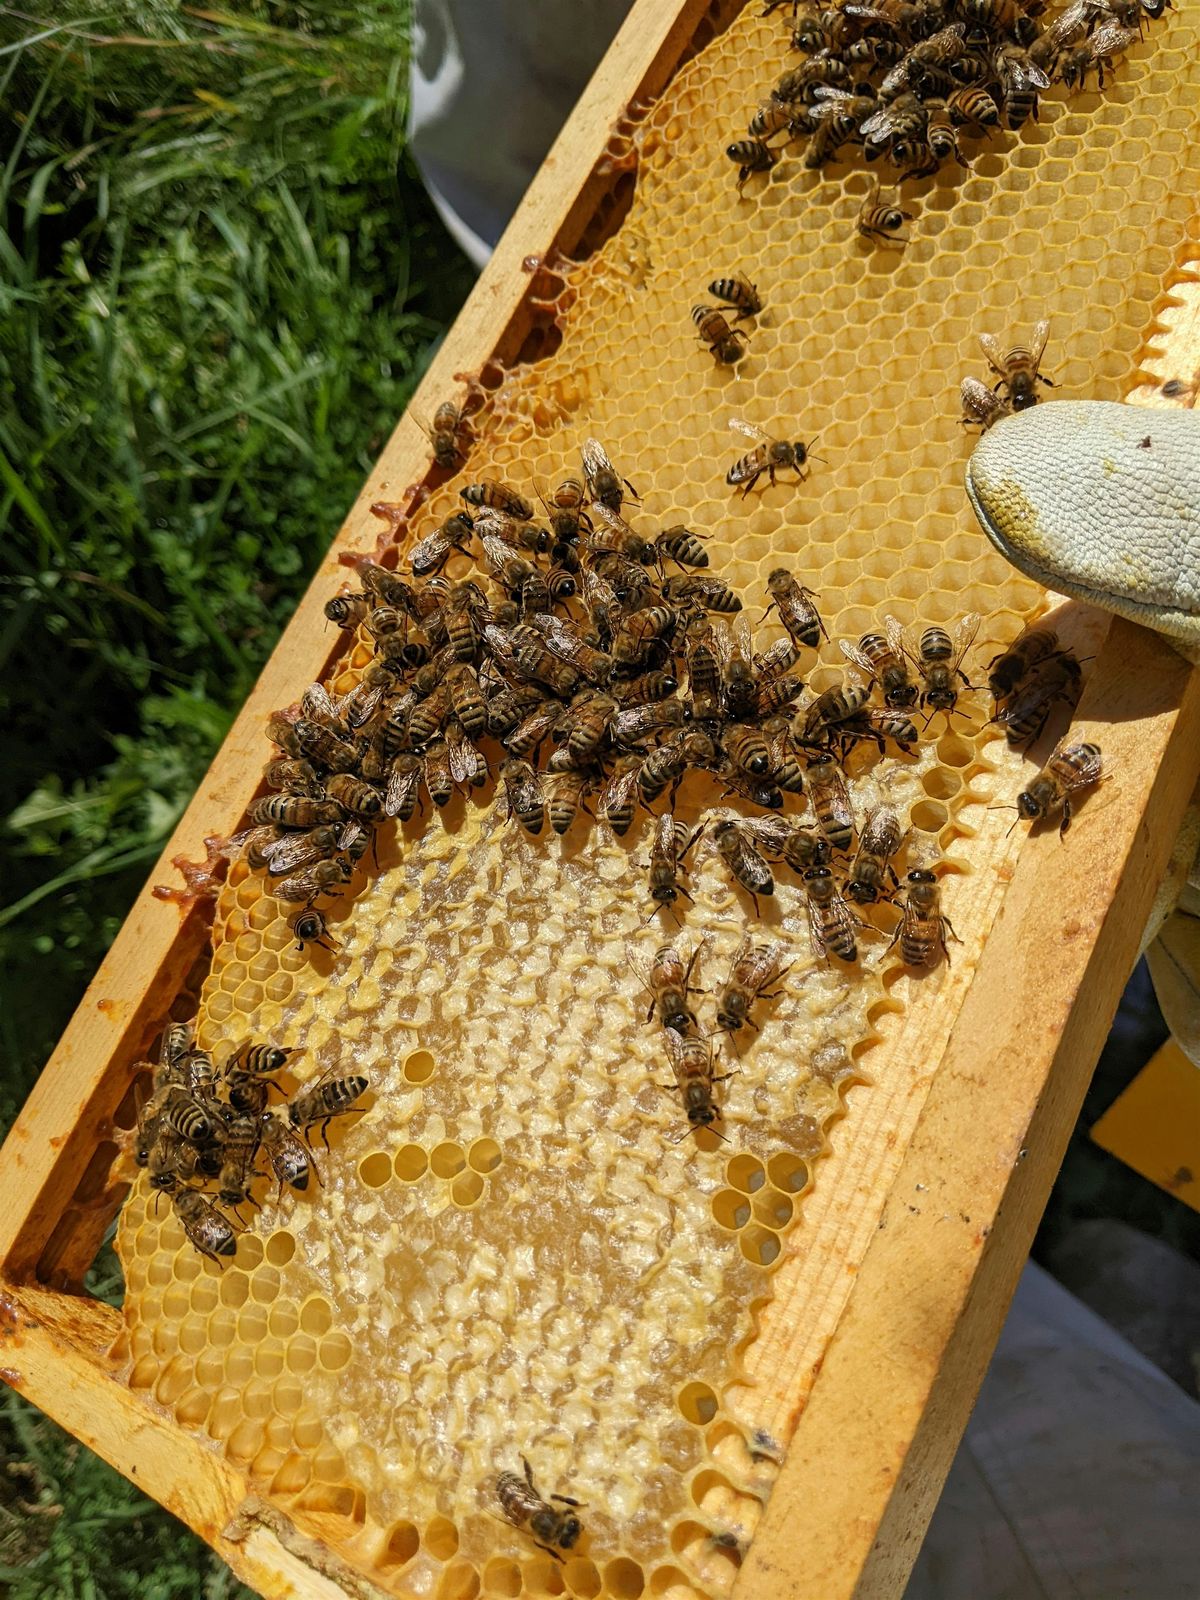 Beekeeping and Processing Honey